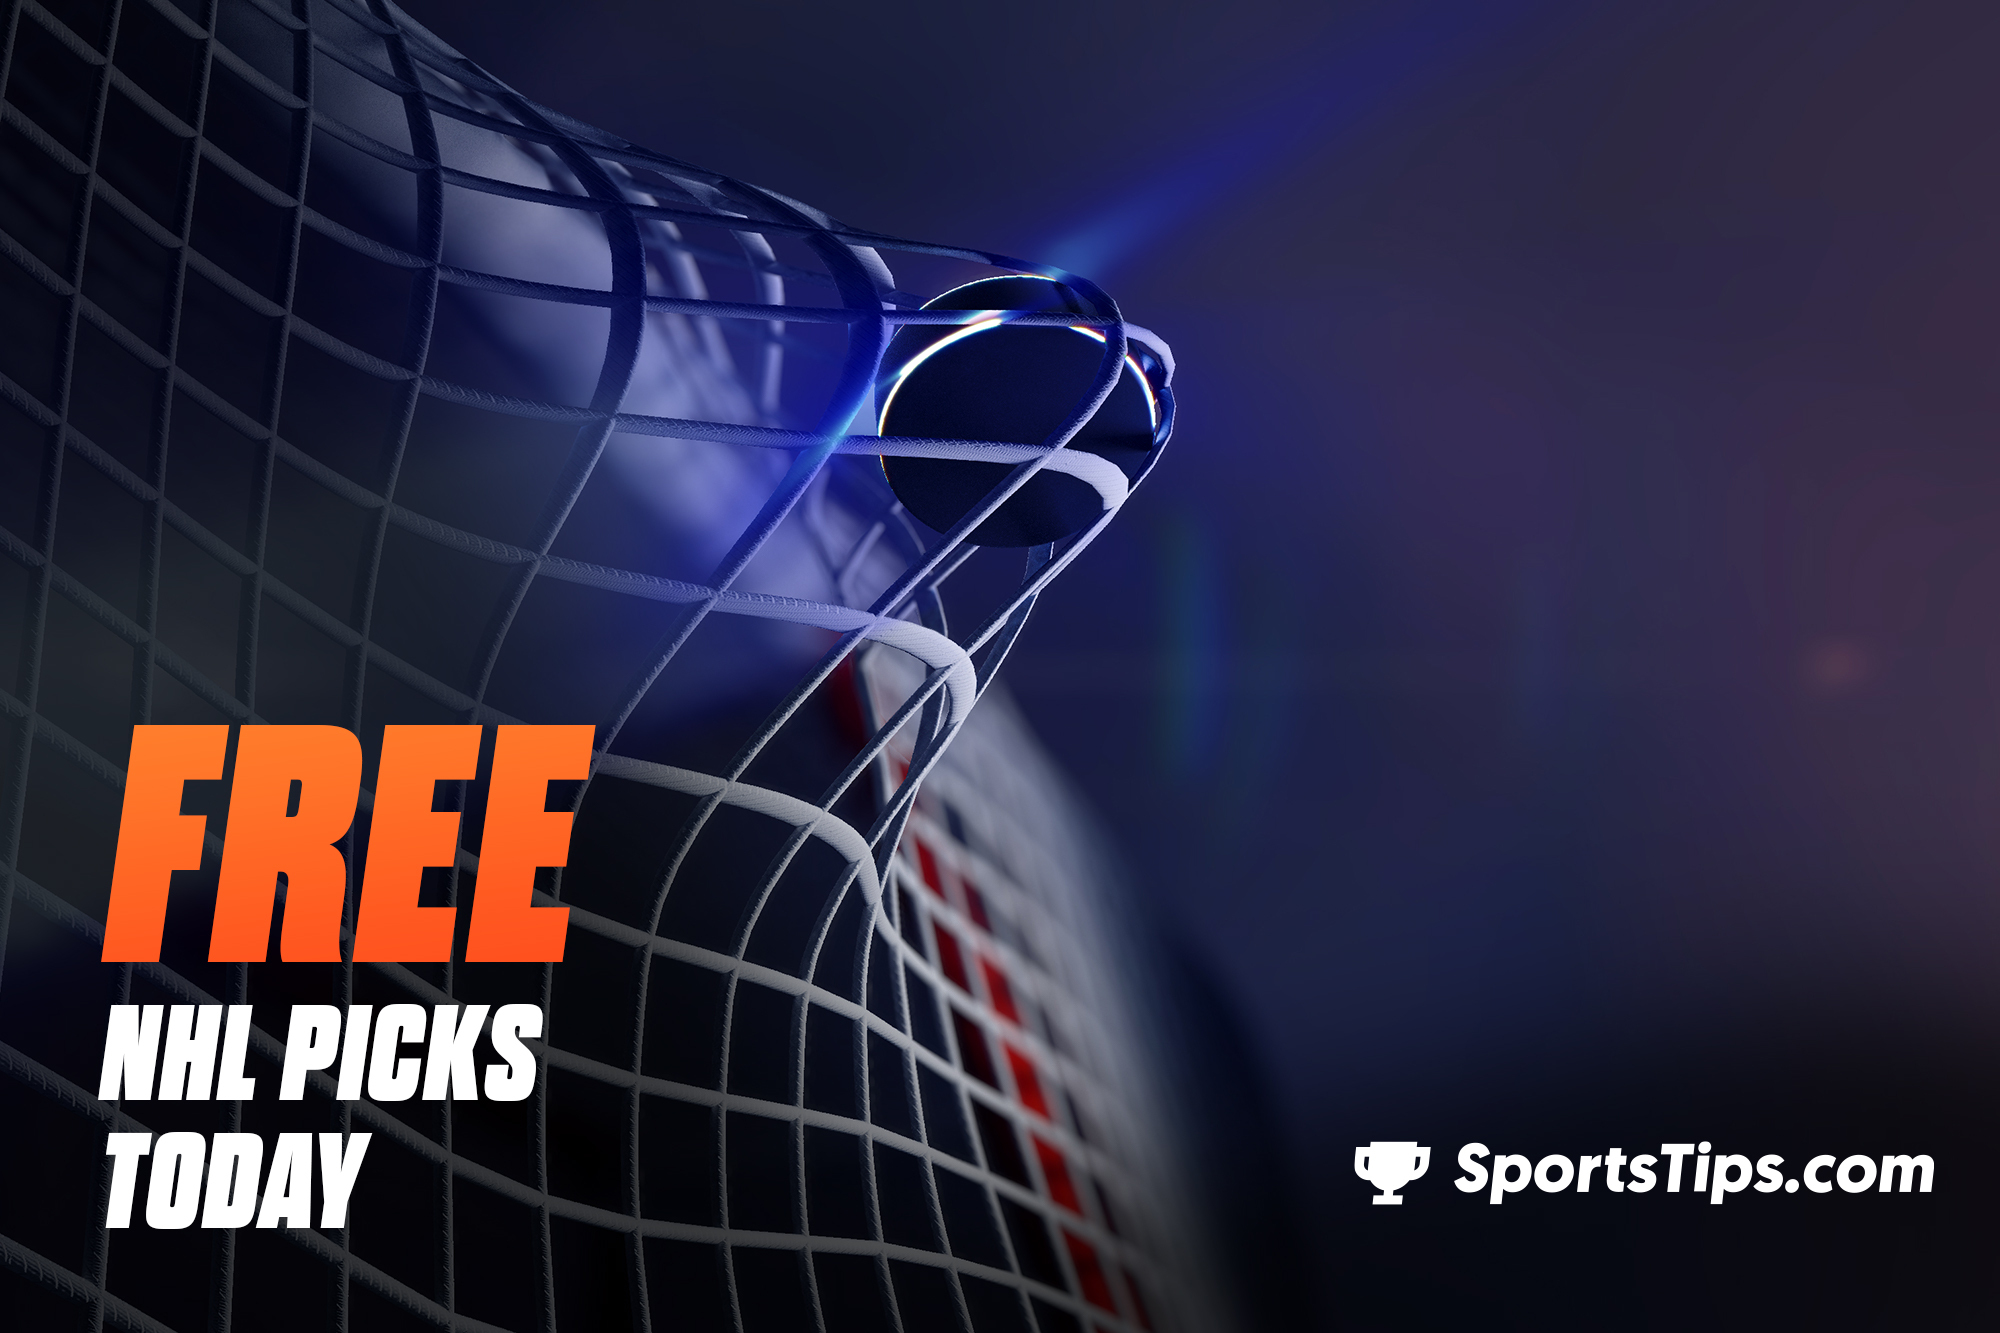 Free NHL Picks Today for Saturday, March 26th, 2022